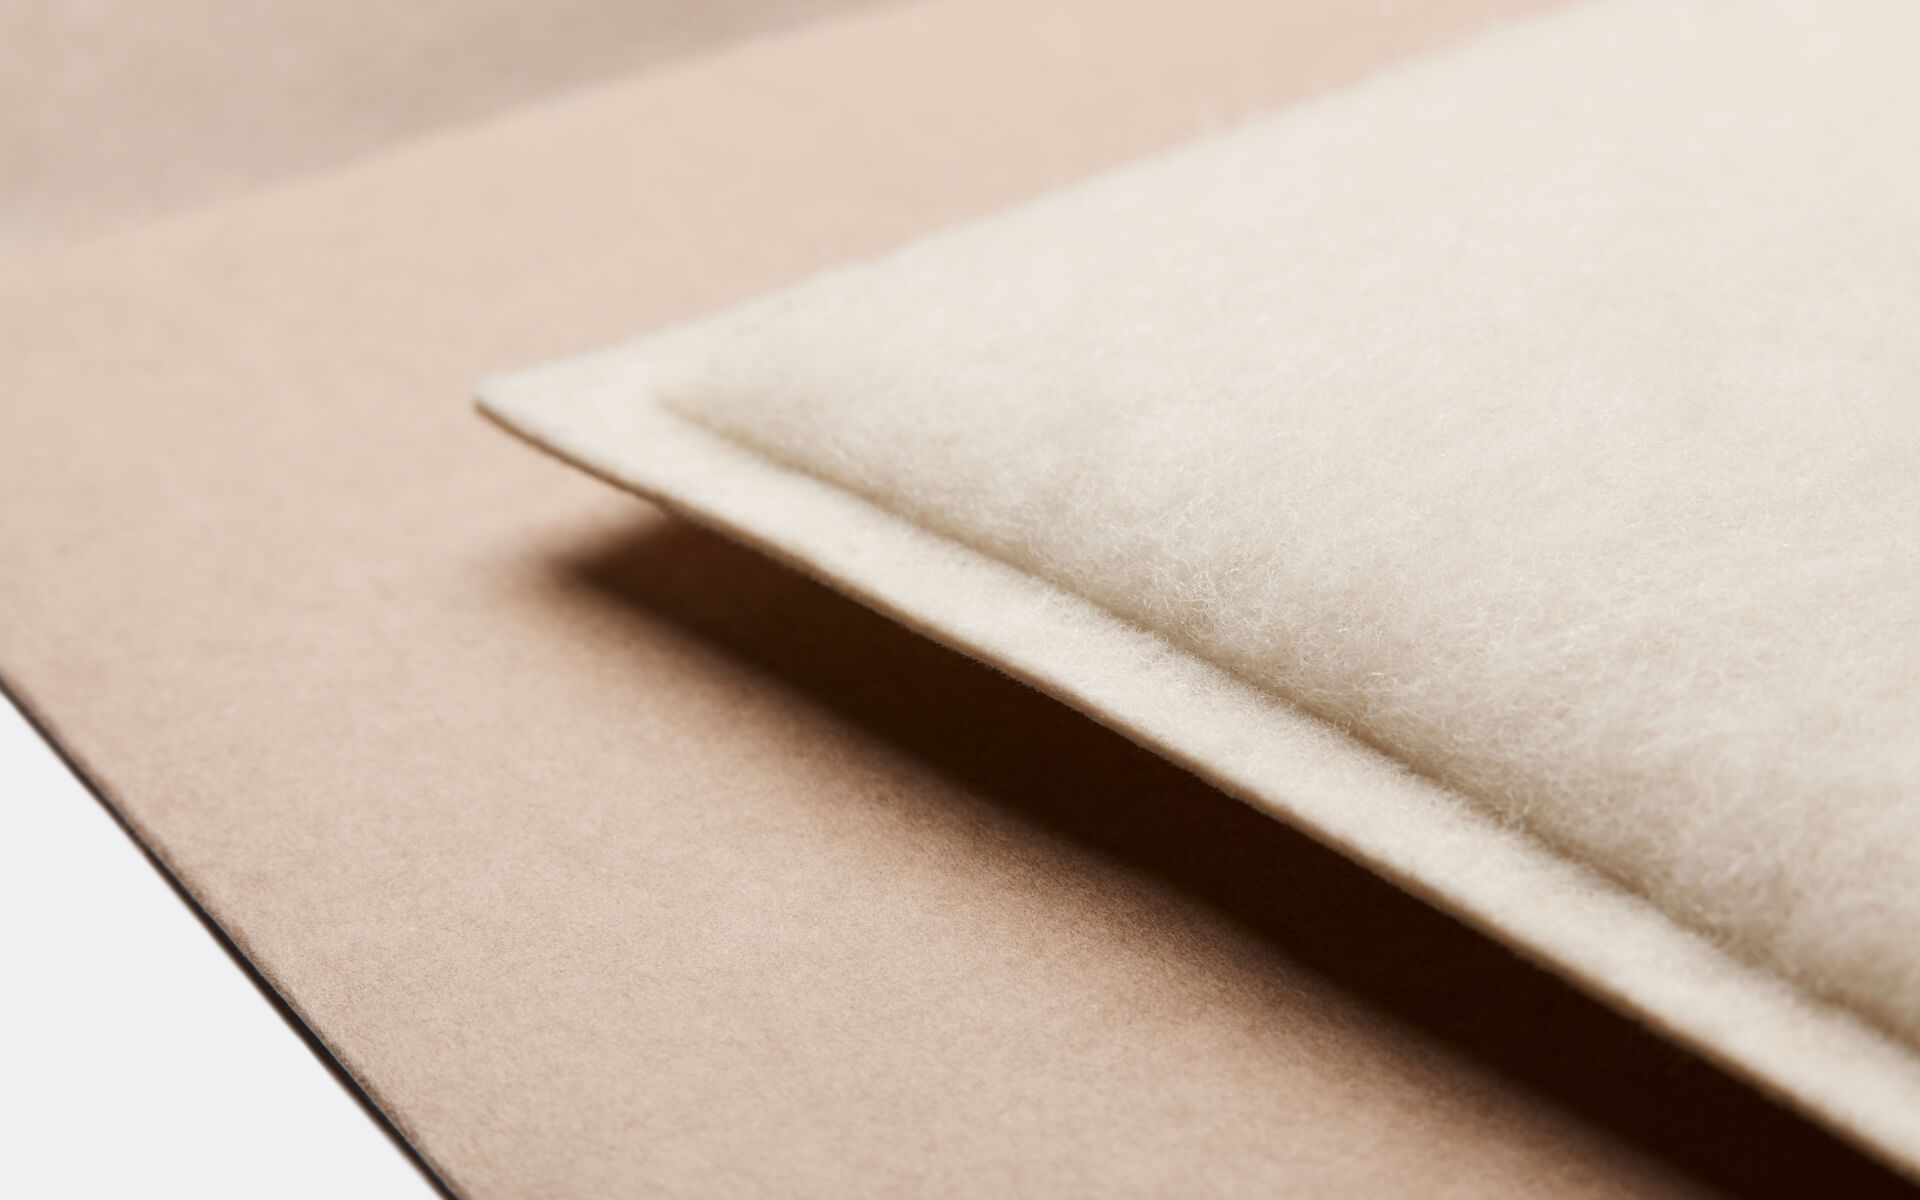 The wool envelope consists of two easily separable layers: the wool lining is covered with a recycled paper envelope